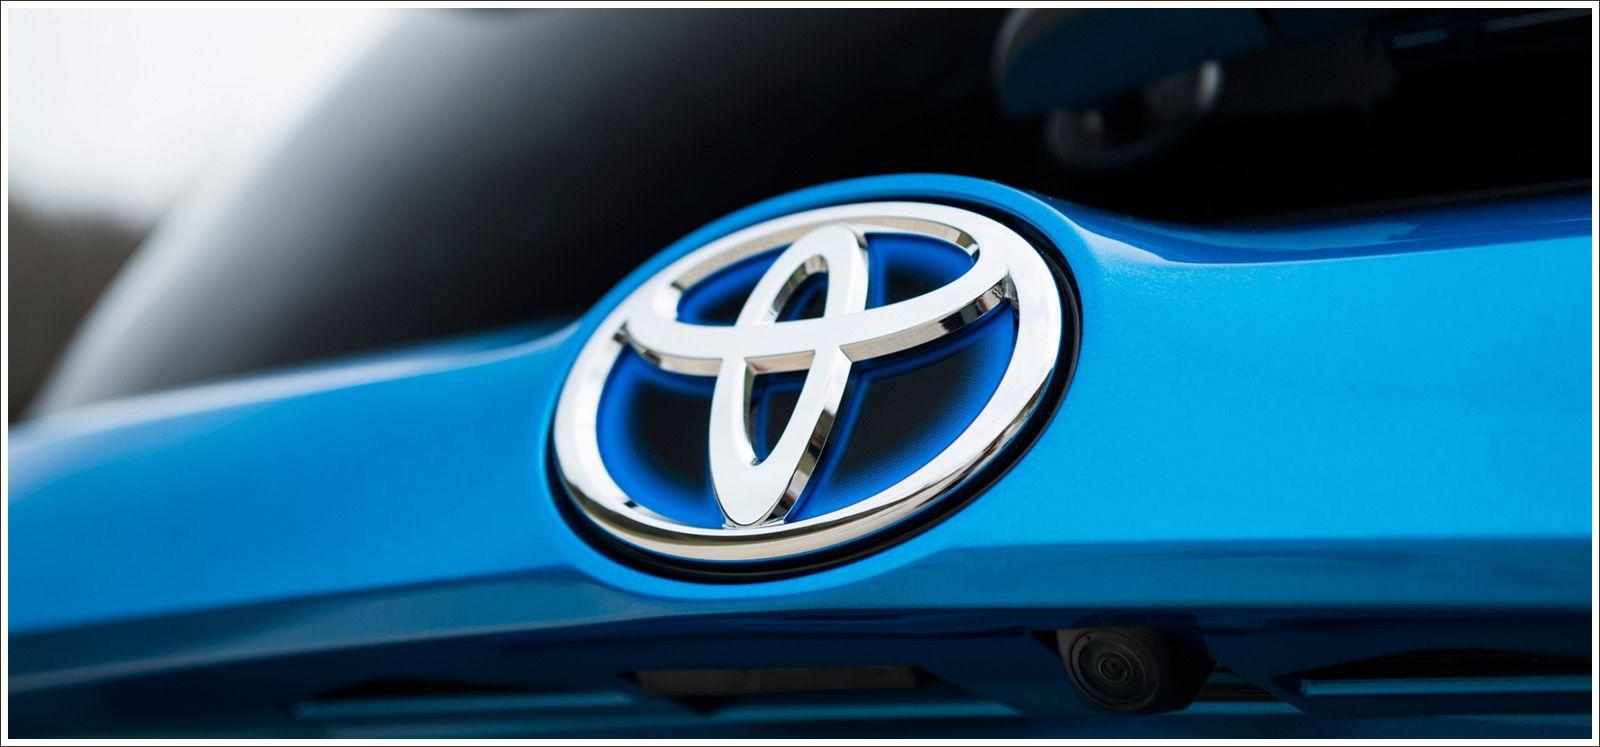 Blue Toyota Logo - Toyota Logo Meaning and History, latest models. World Cars Brands